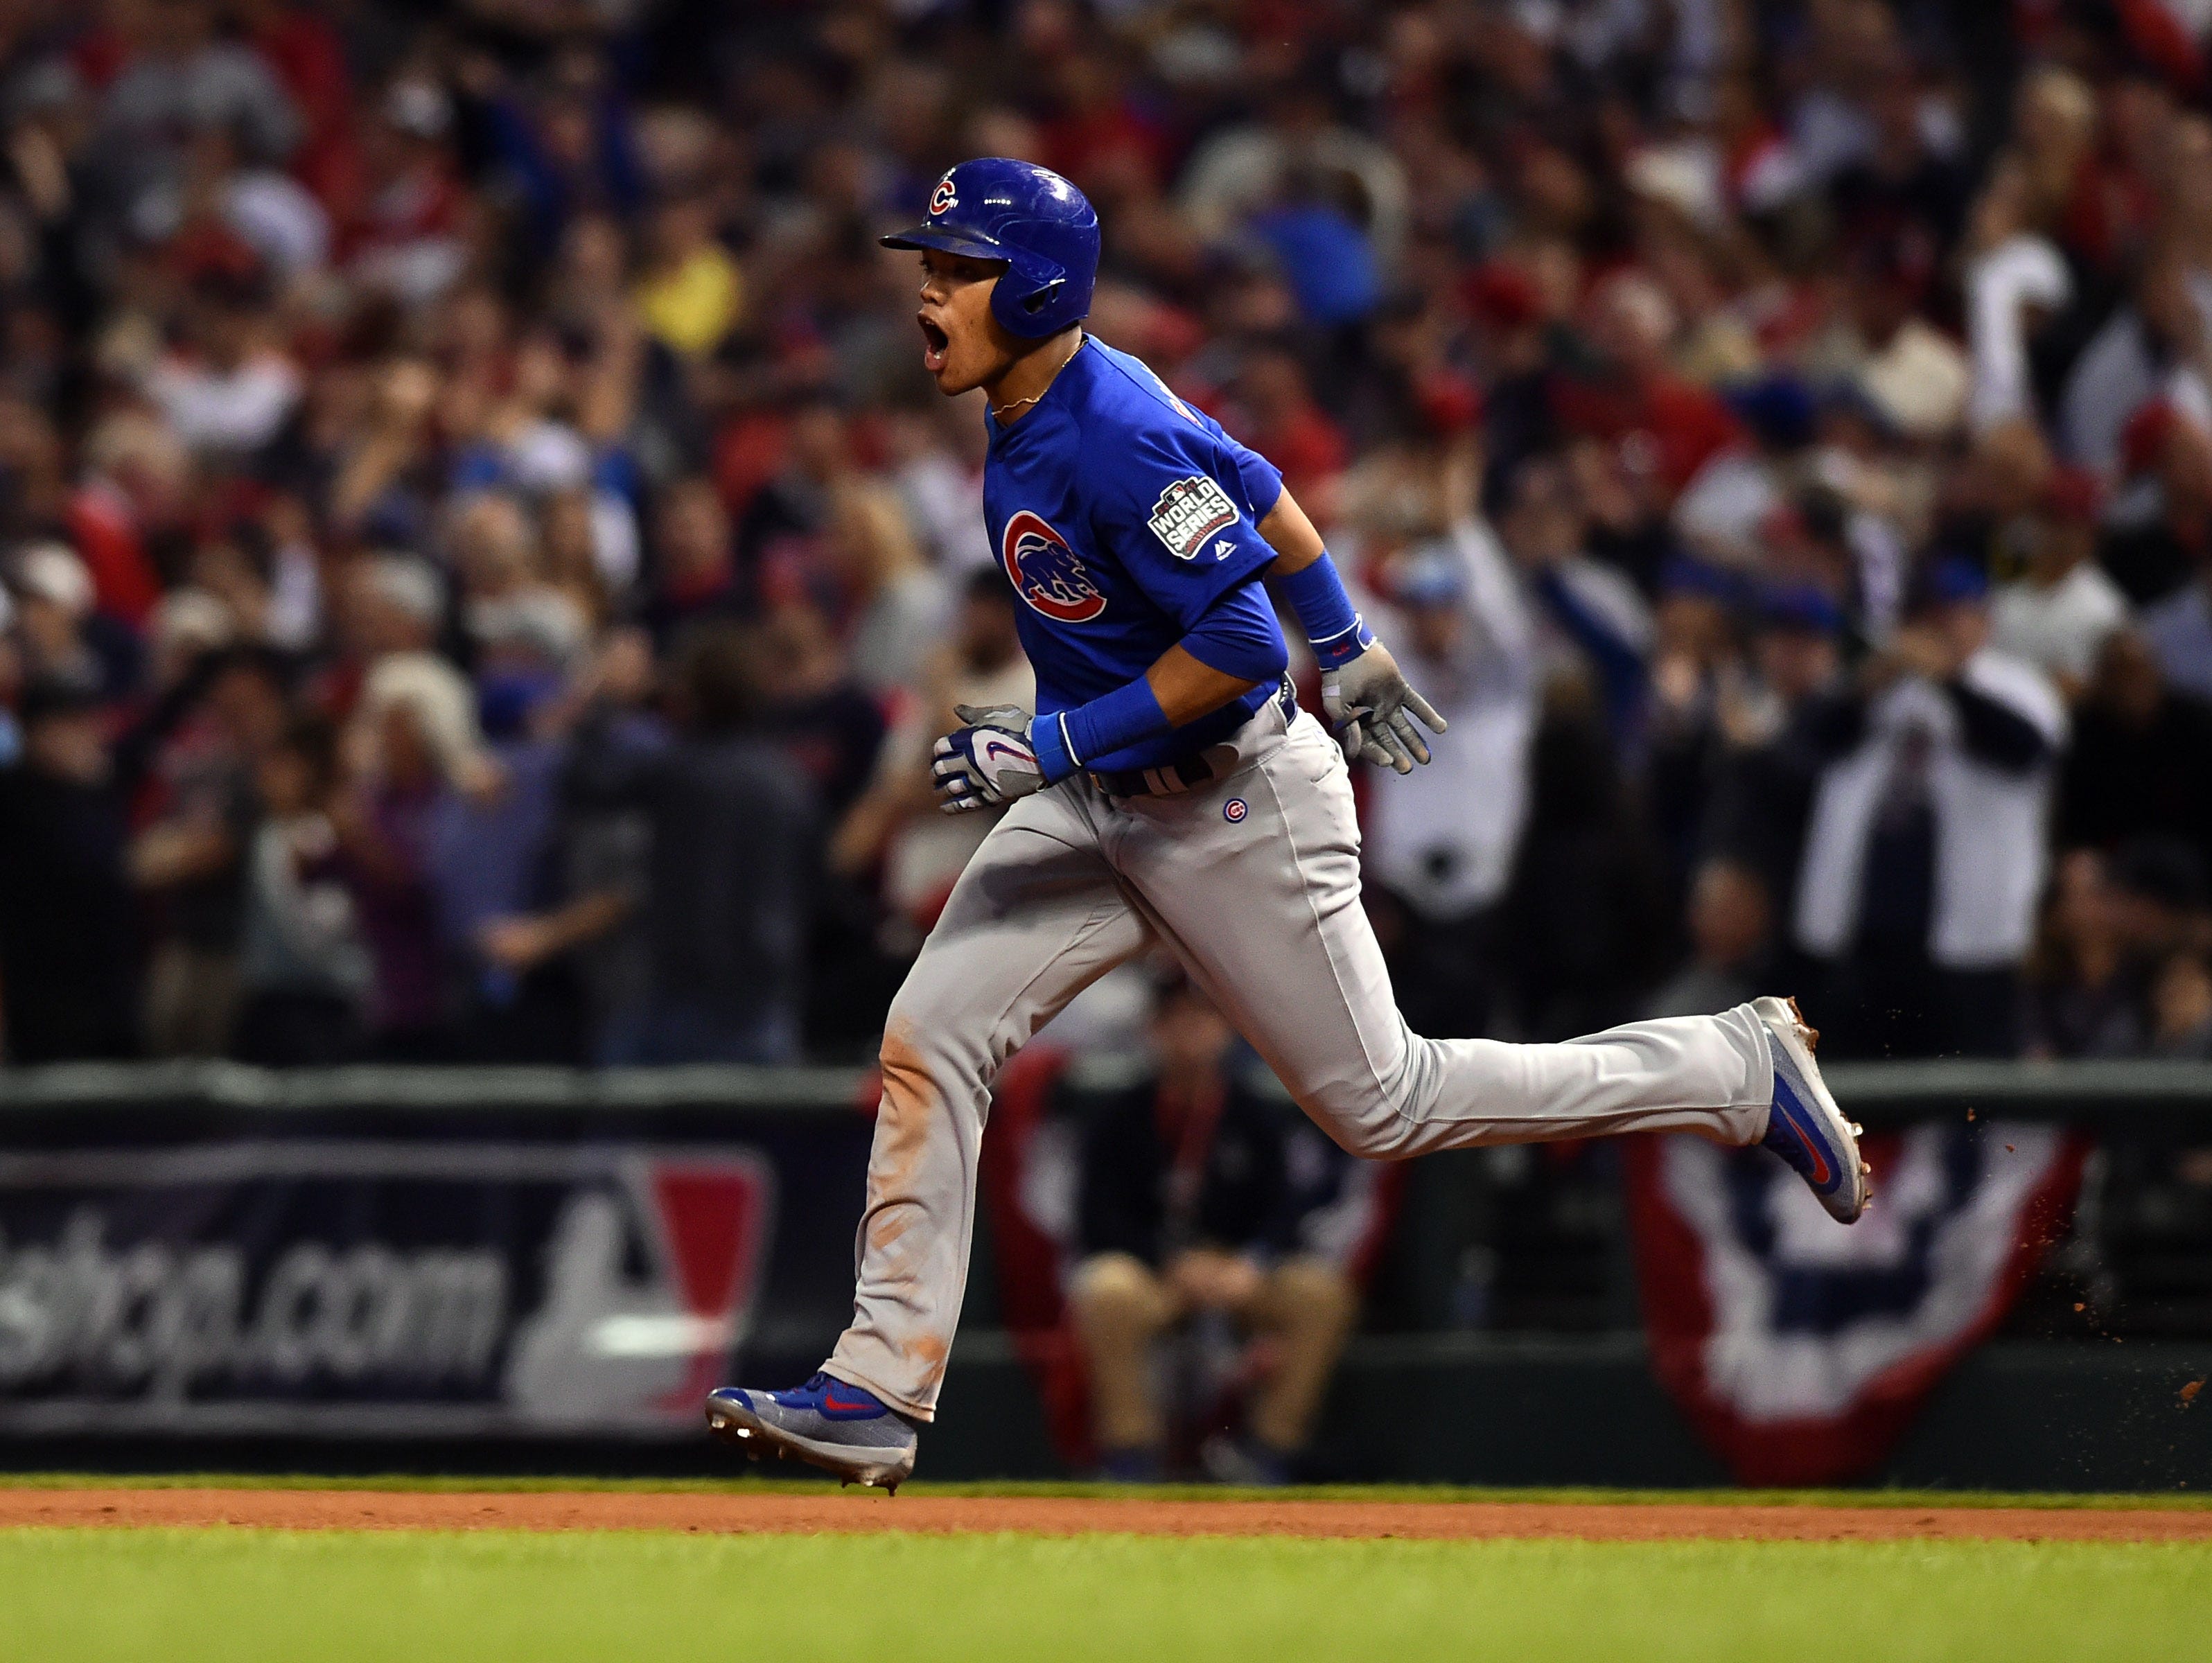 Chicago Cubs shortstop Addison Russell celebrates after hitting a grand slam against the Cleveland Indians in the third inning in game six of the 2016 World Series at Progressive Field in Cleveland.